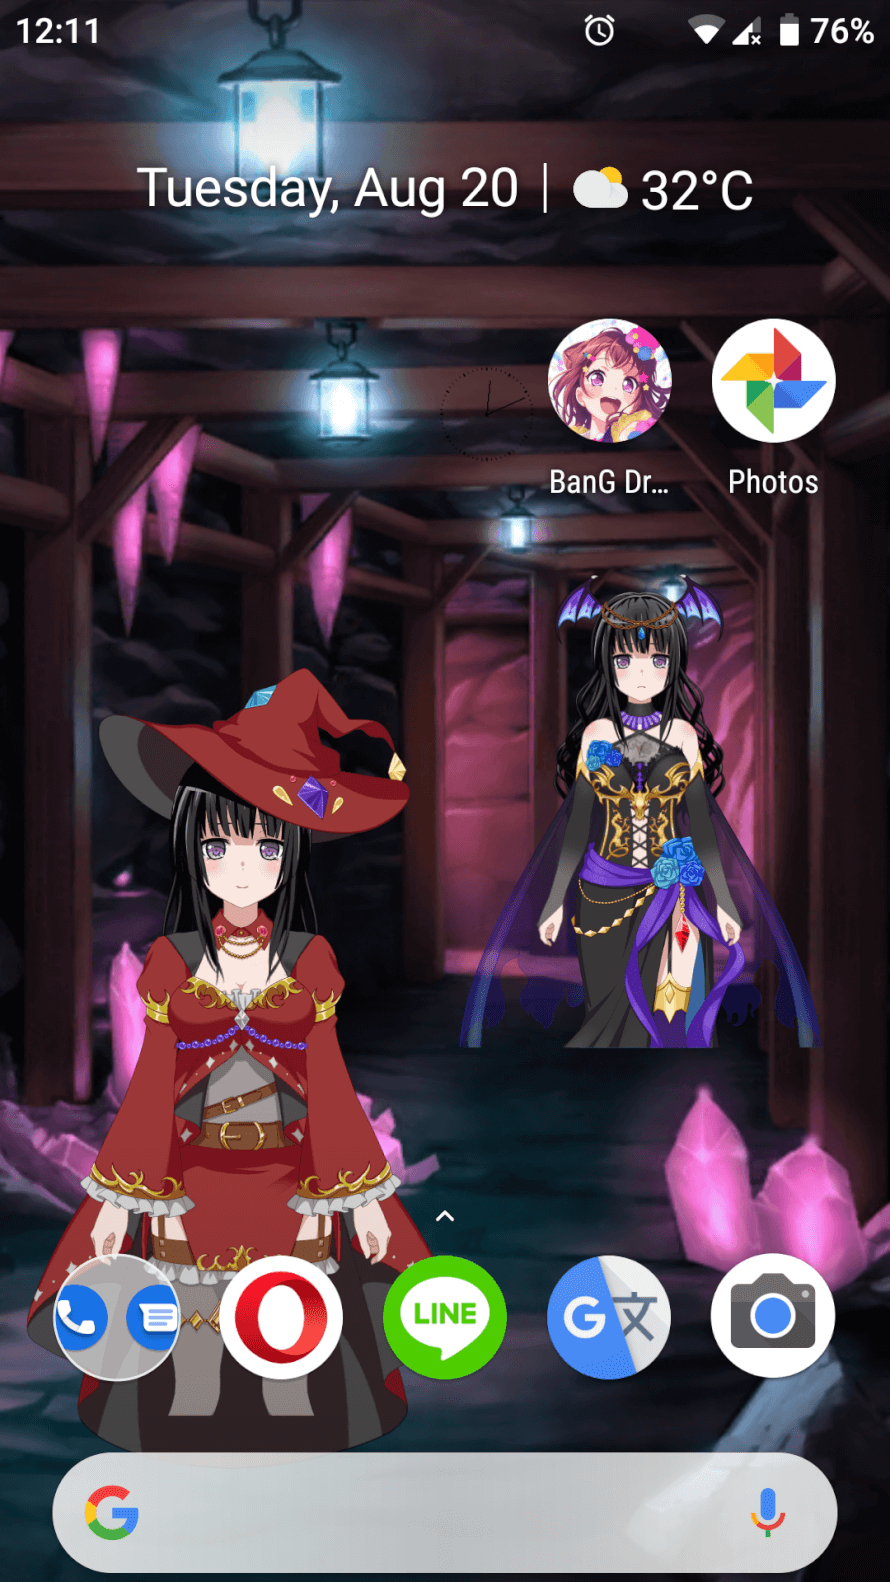  RinRin 
:  I've come to beat you, my other self!!   `・ω・´ 

 Overlord Rinko 
:  Oh? You're...